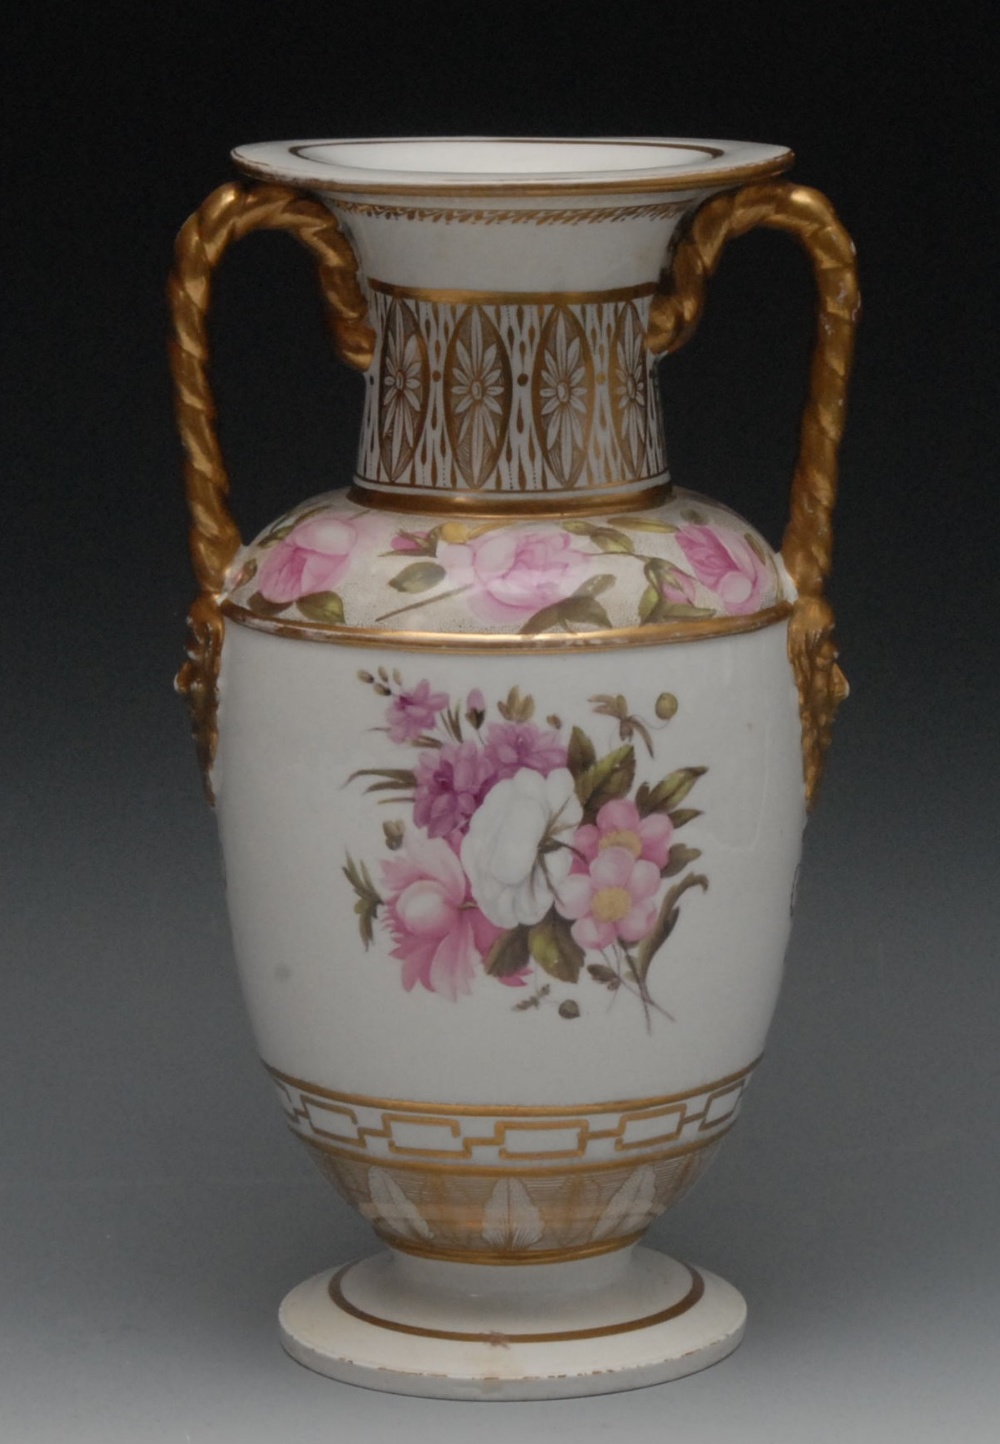 An English porcelain two-handled pedestal ovoid vases, well painted with bouquet of colourful